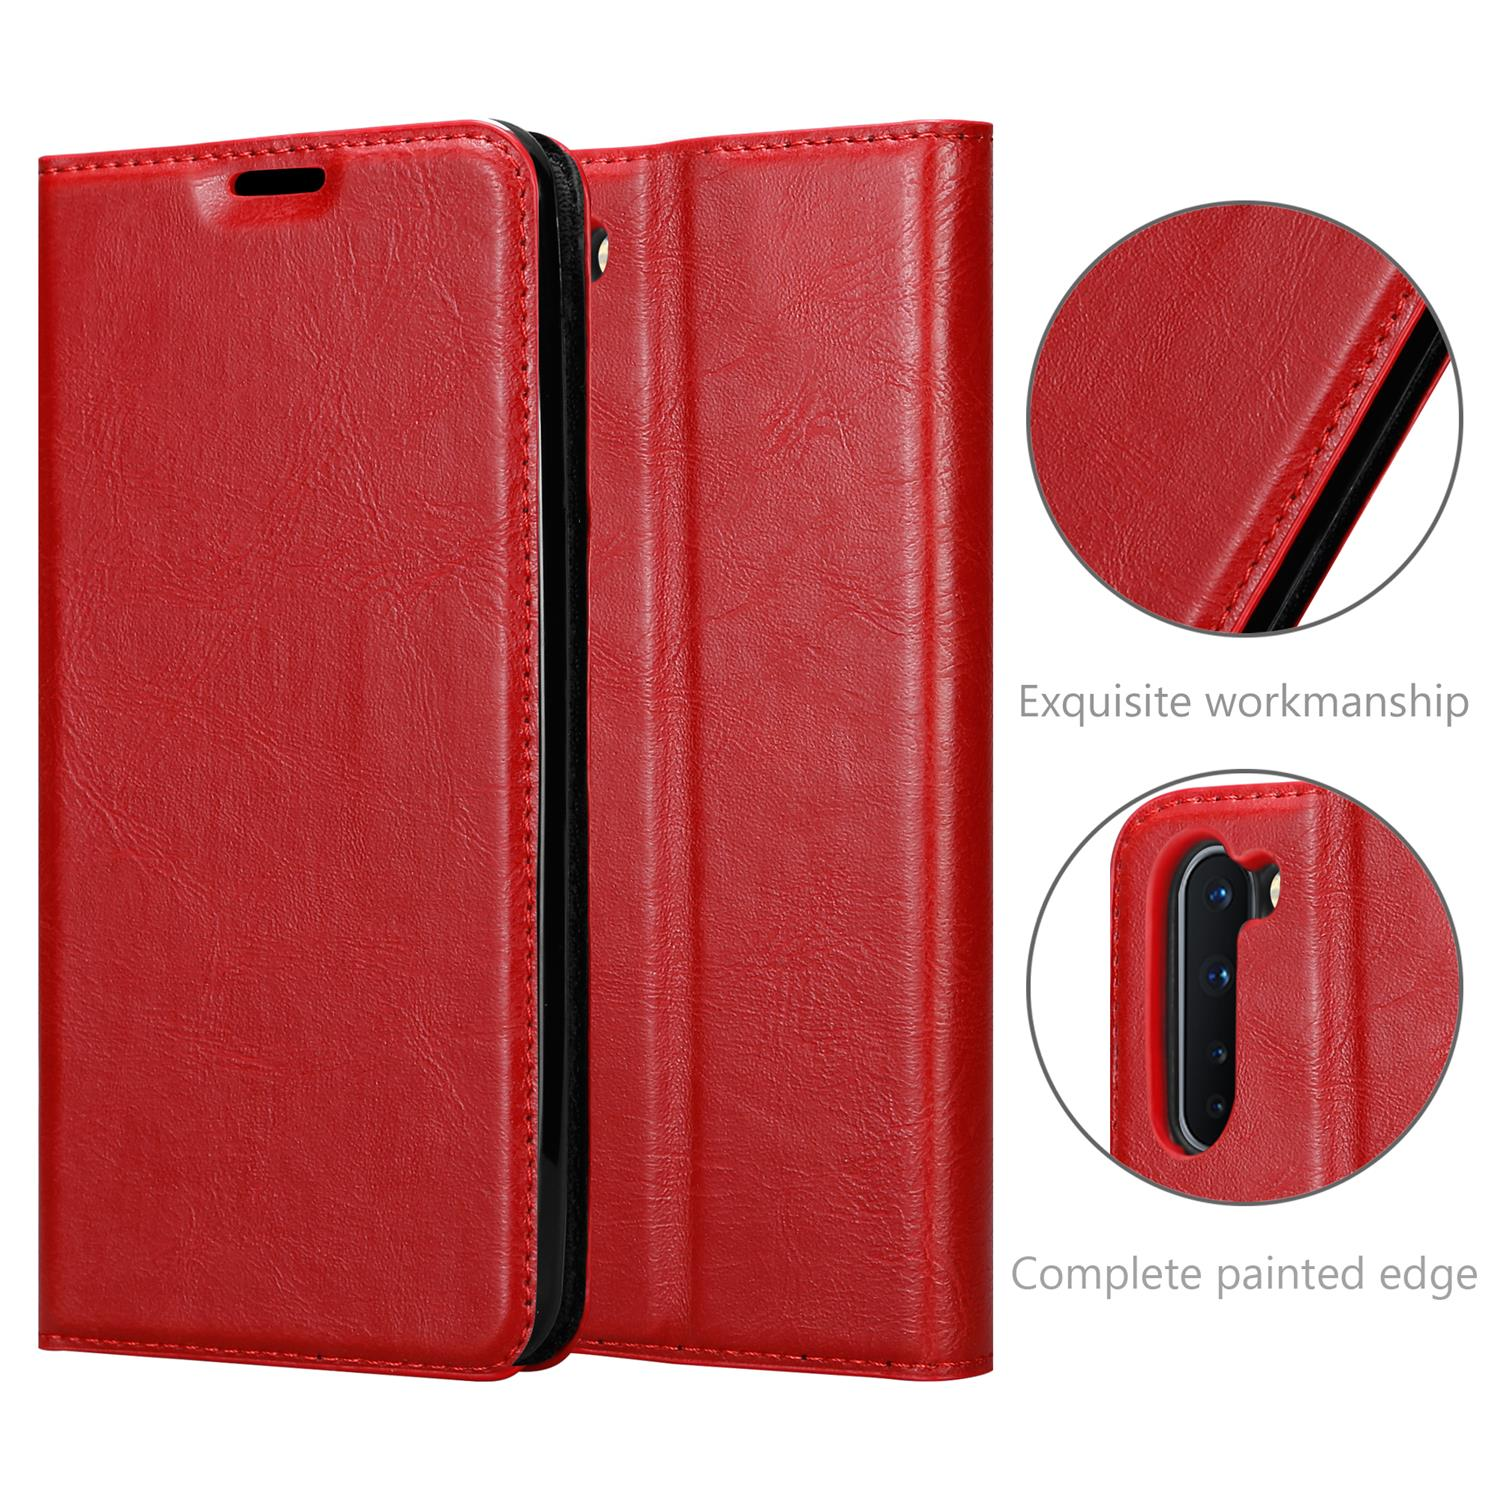 CADORABO OnePlus, Bookcover, Invisible Book Nord, Hülle Magnet, ROT APFEL